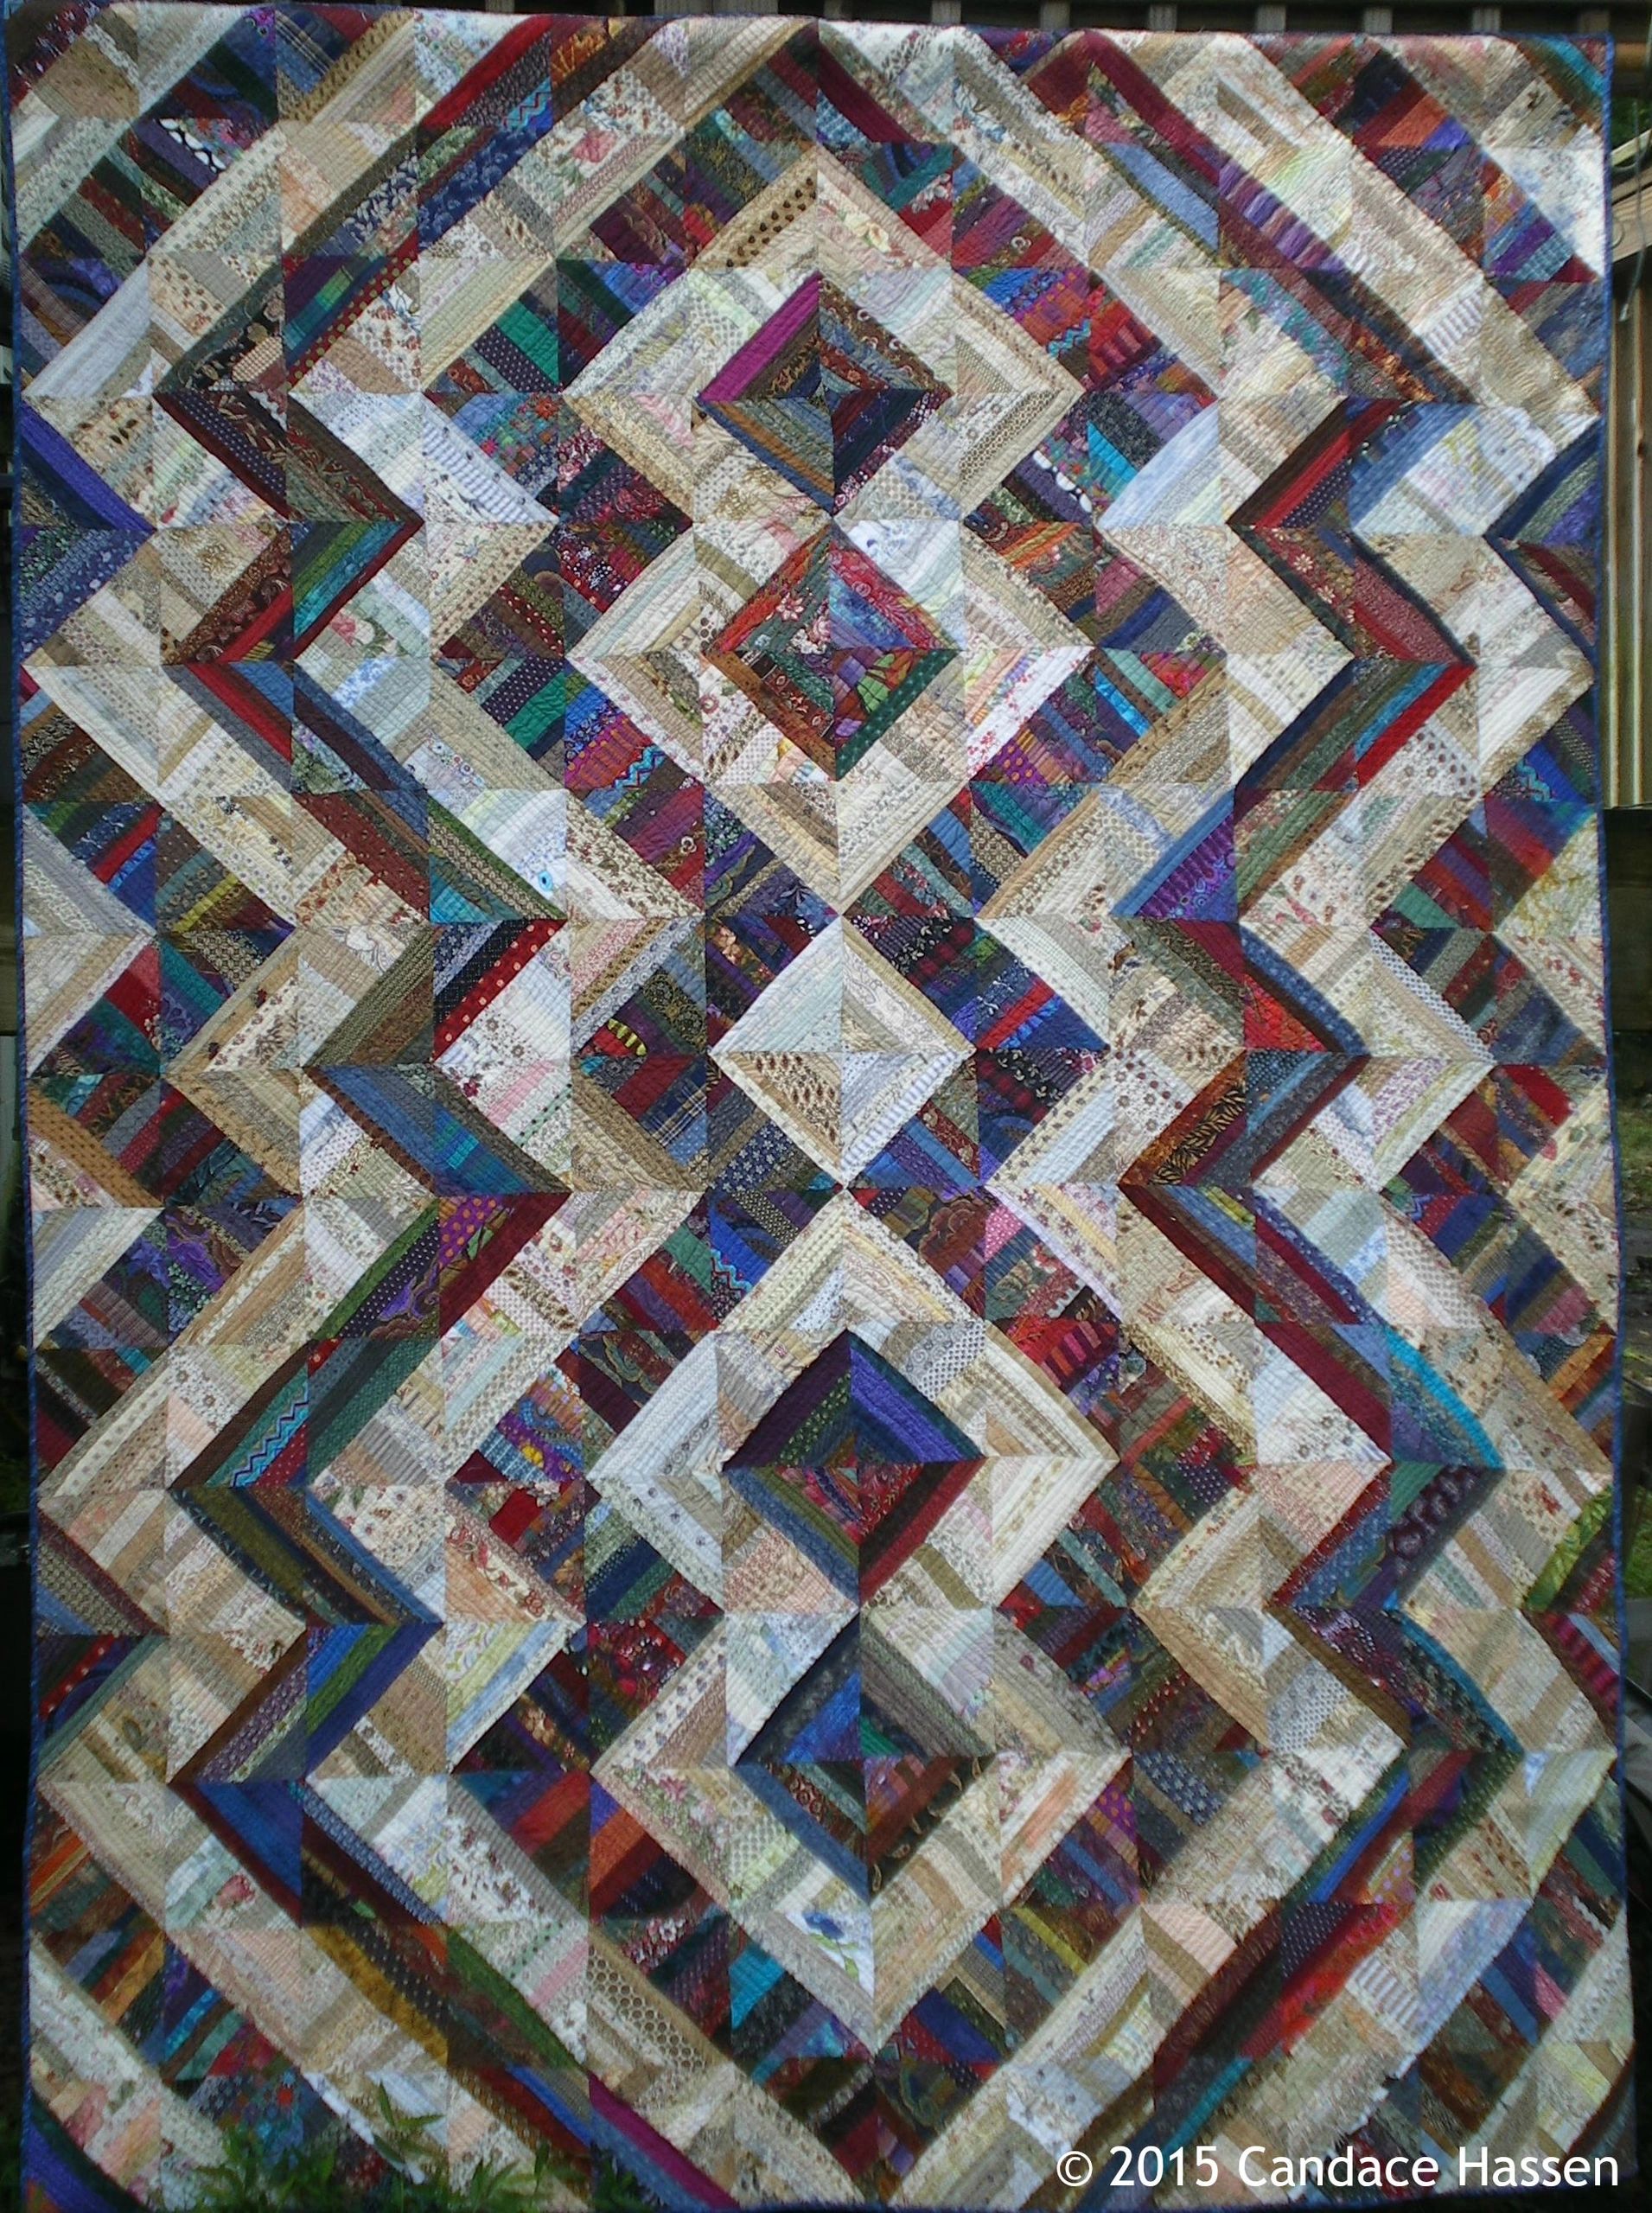 Full size Scrappy quilt in light and dark prints